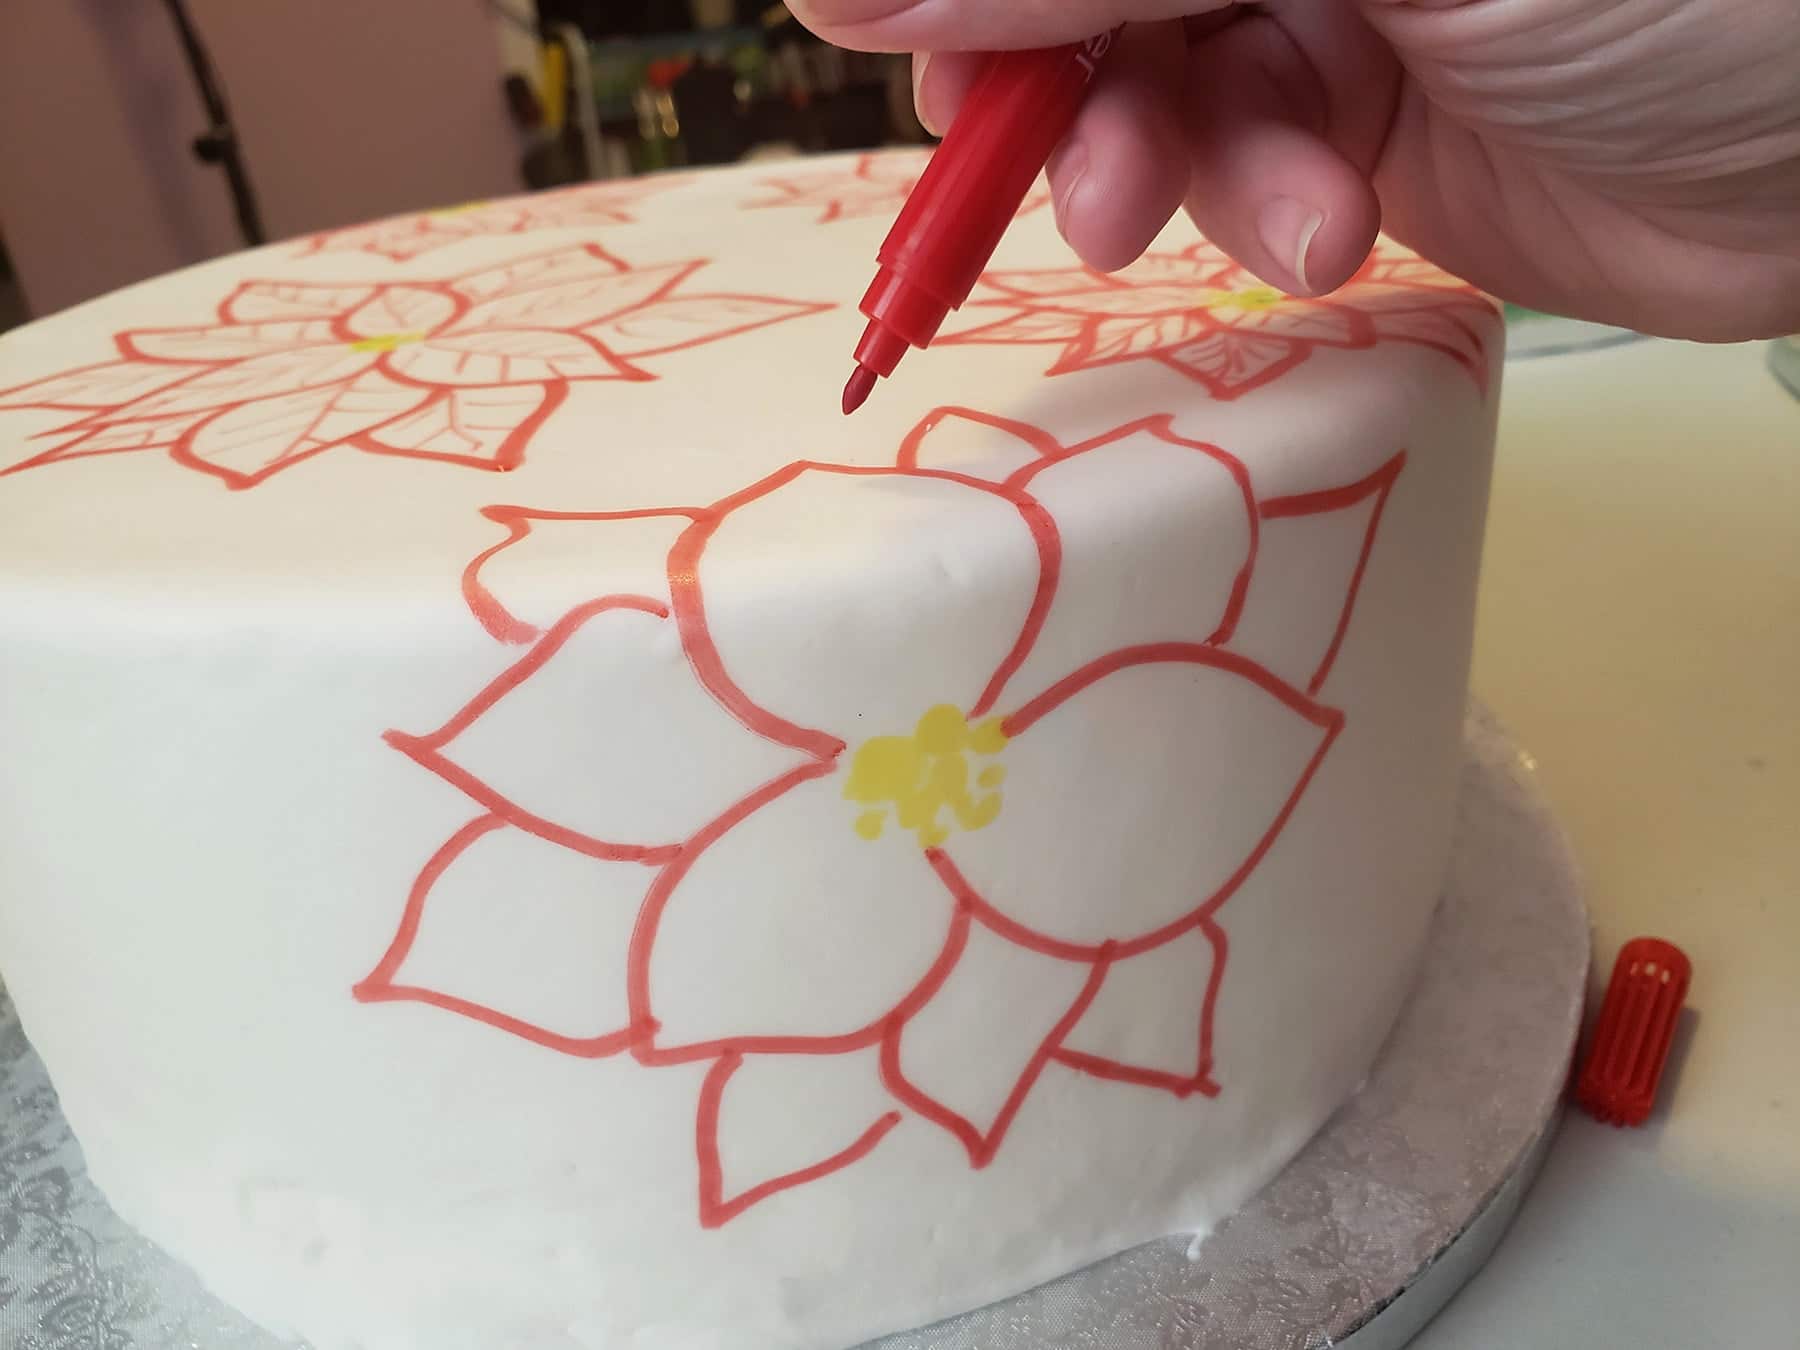 A hand uses a red food colouring marker to draw red poinsettias on a smooth white round cake.